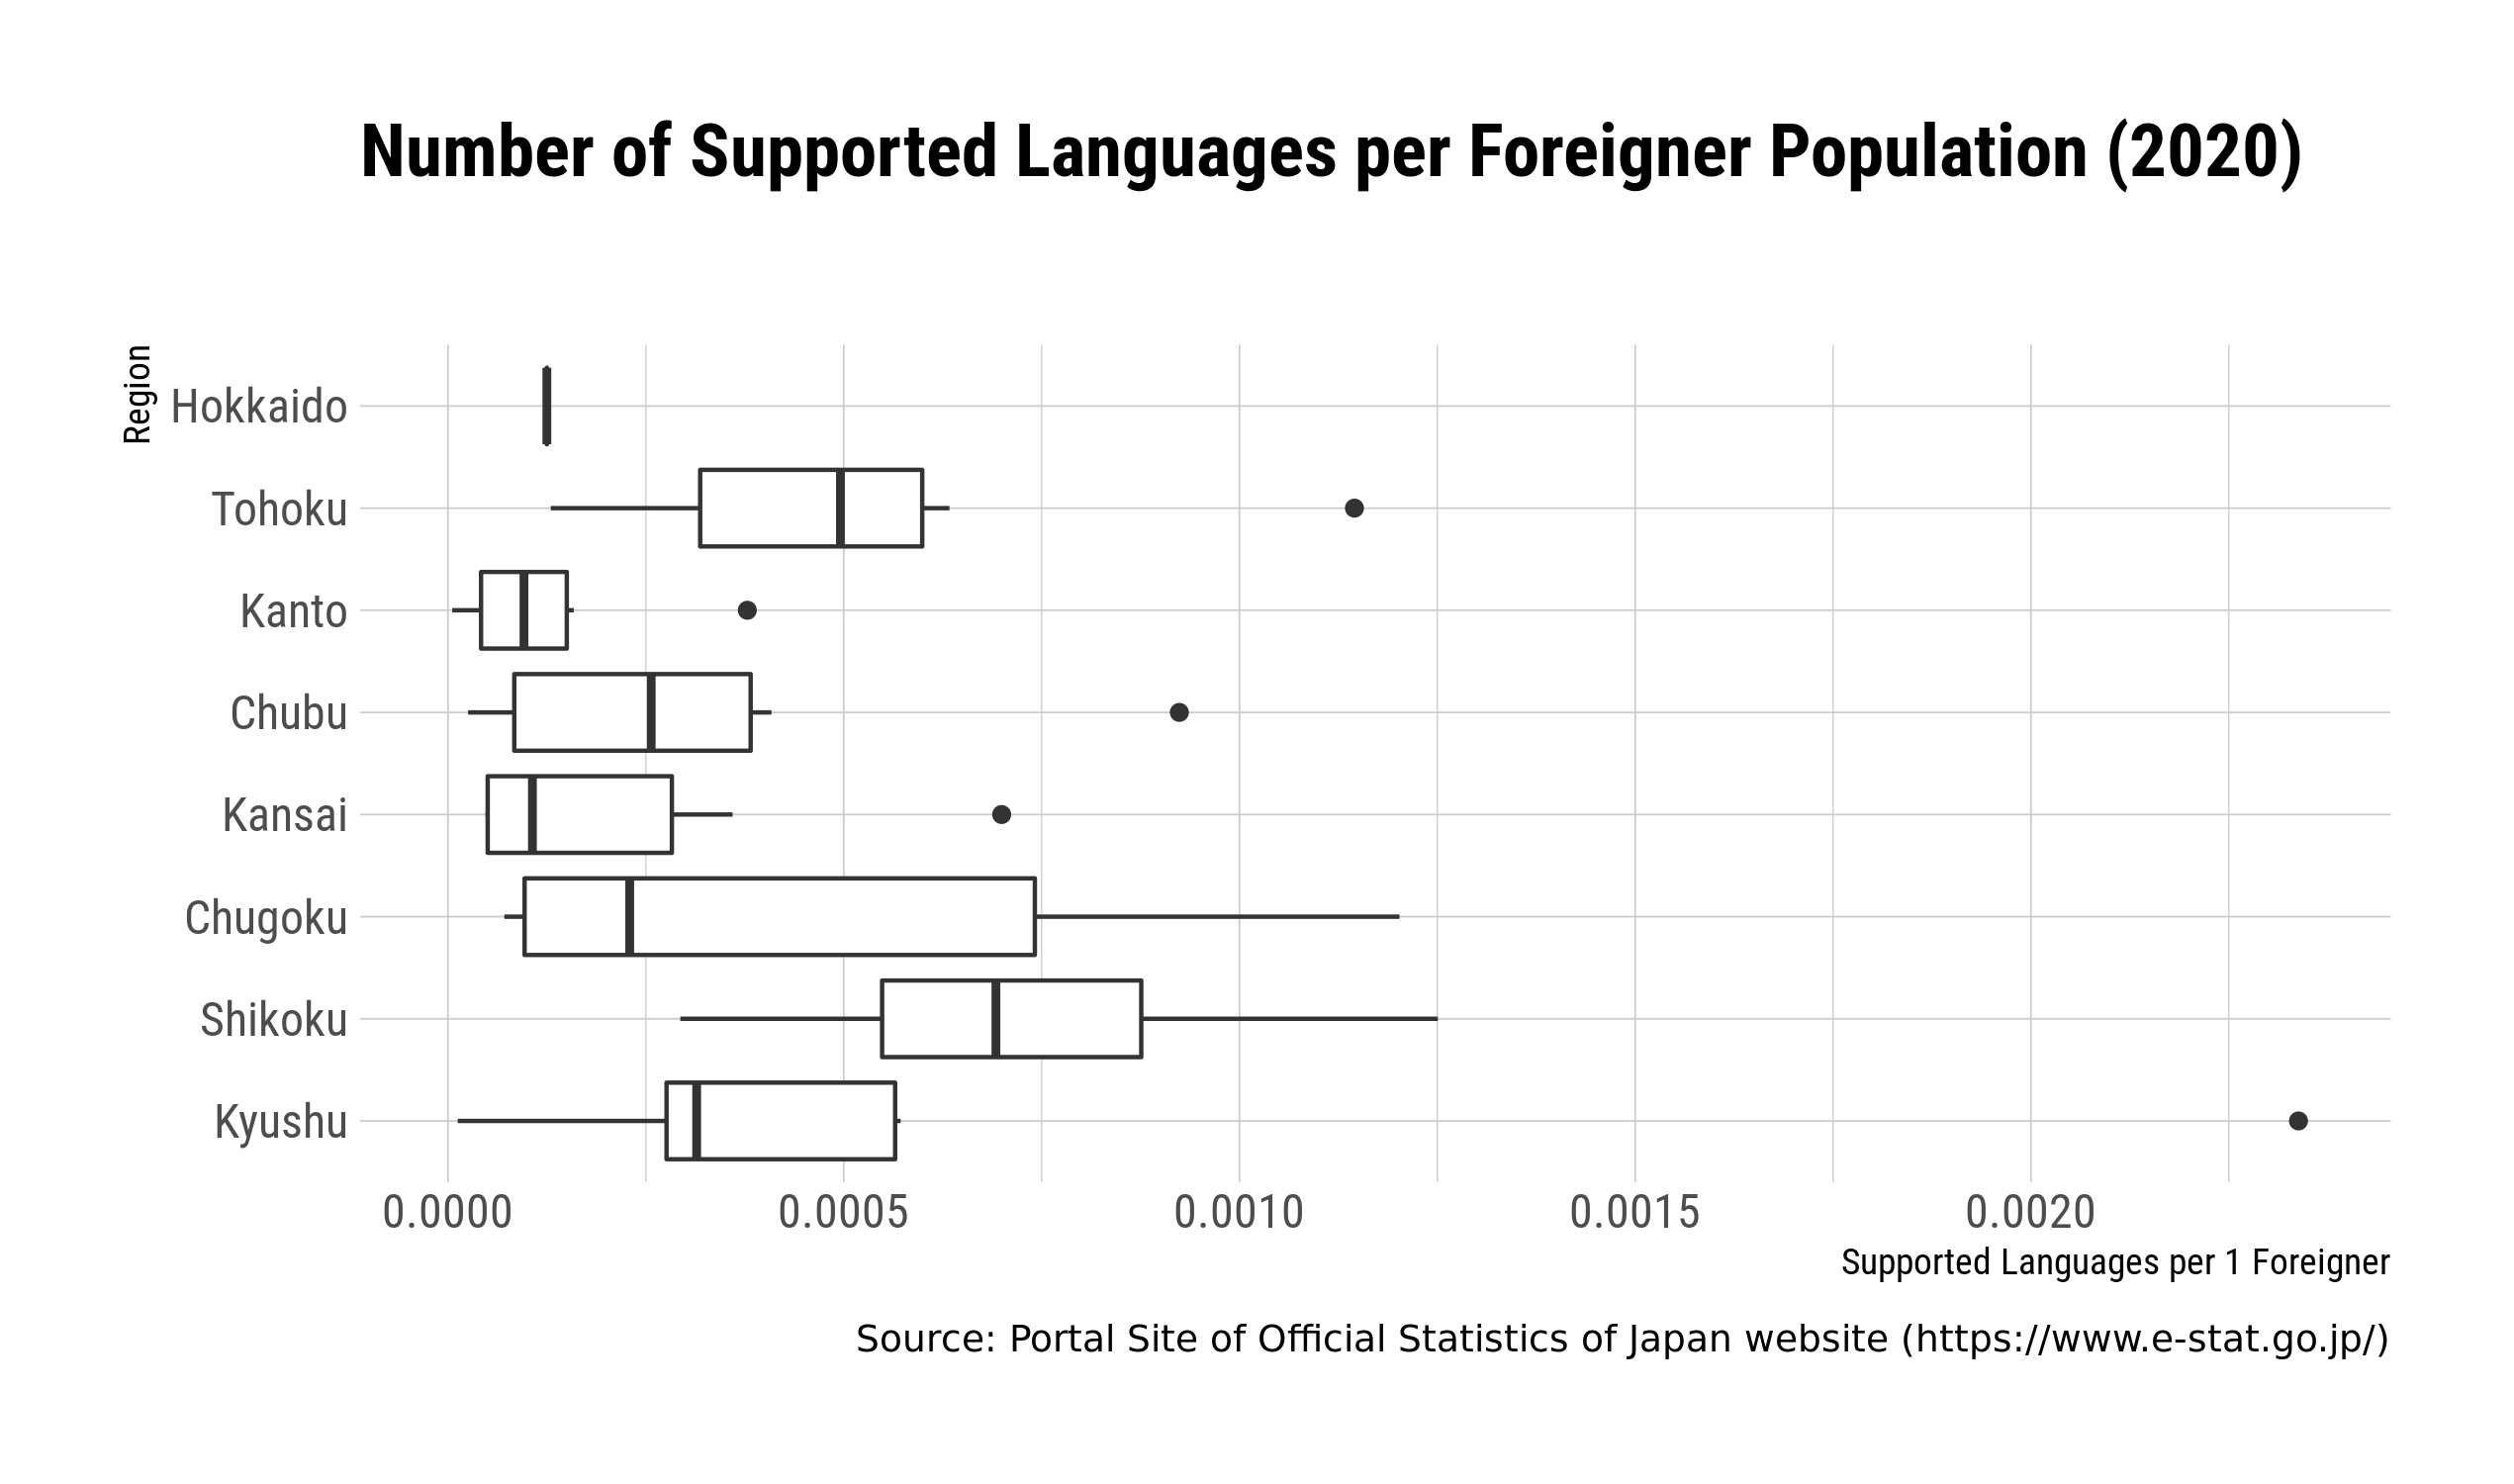 Kanto prefectures seem to have a low median number of supported languages per foreign resident